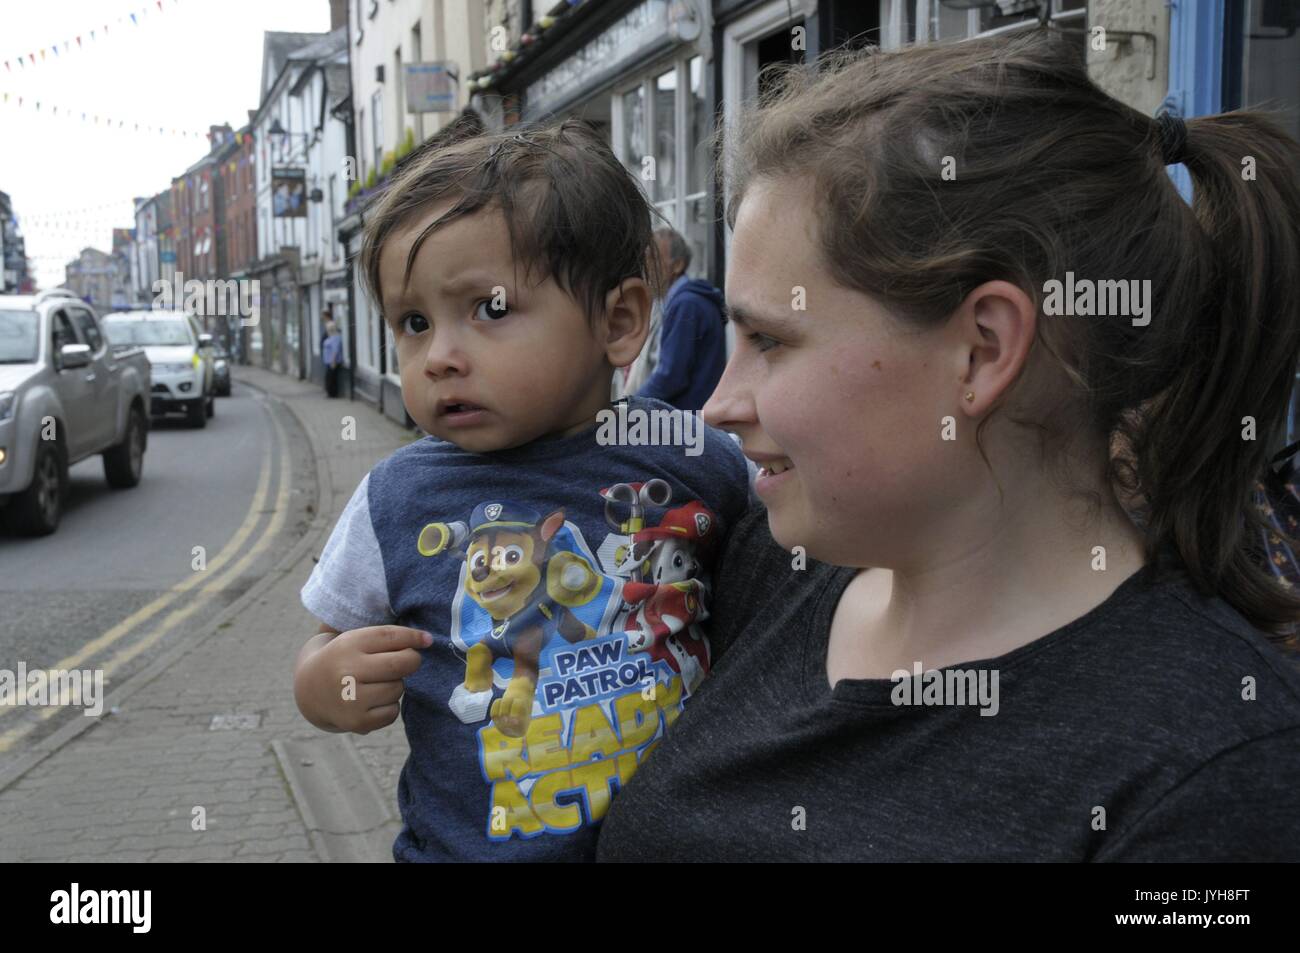 Kington, , UK. 20th Aug, 2017. The Herefordshire market town of Kington came to a standstill while a parade of vintage vehicles made their way to the Kington Vintage Club's 25th Annual Show. Natalie Compton and her two year old son Oscar watch the parade go through. Credit: Andrew Compton/Alamy Live News Stock Photo